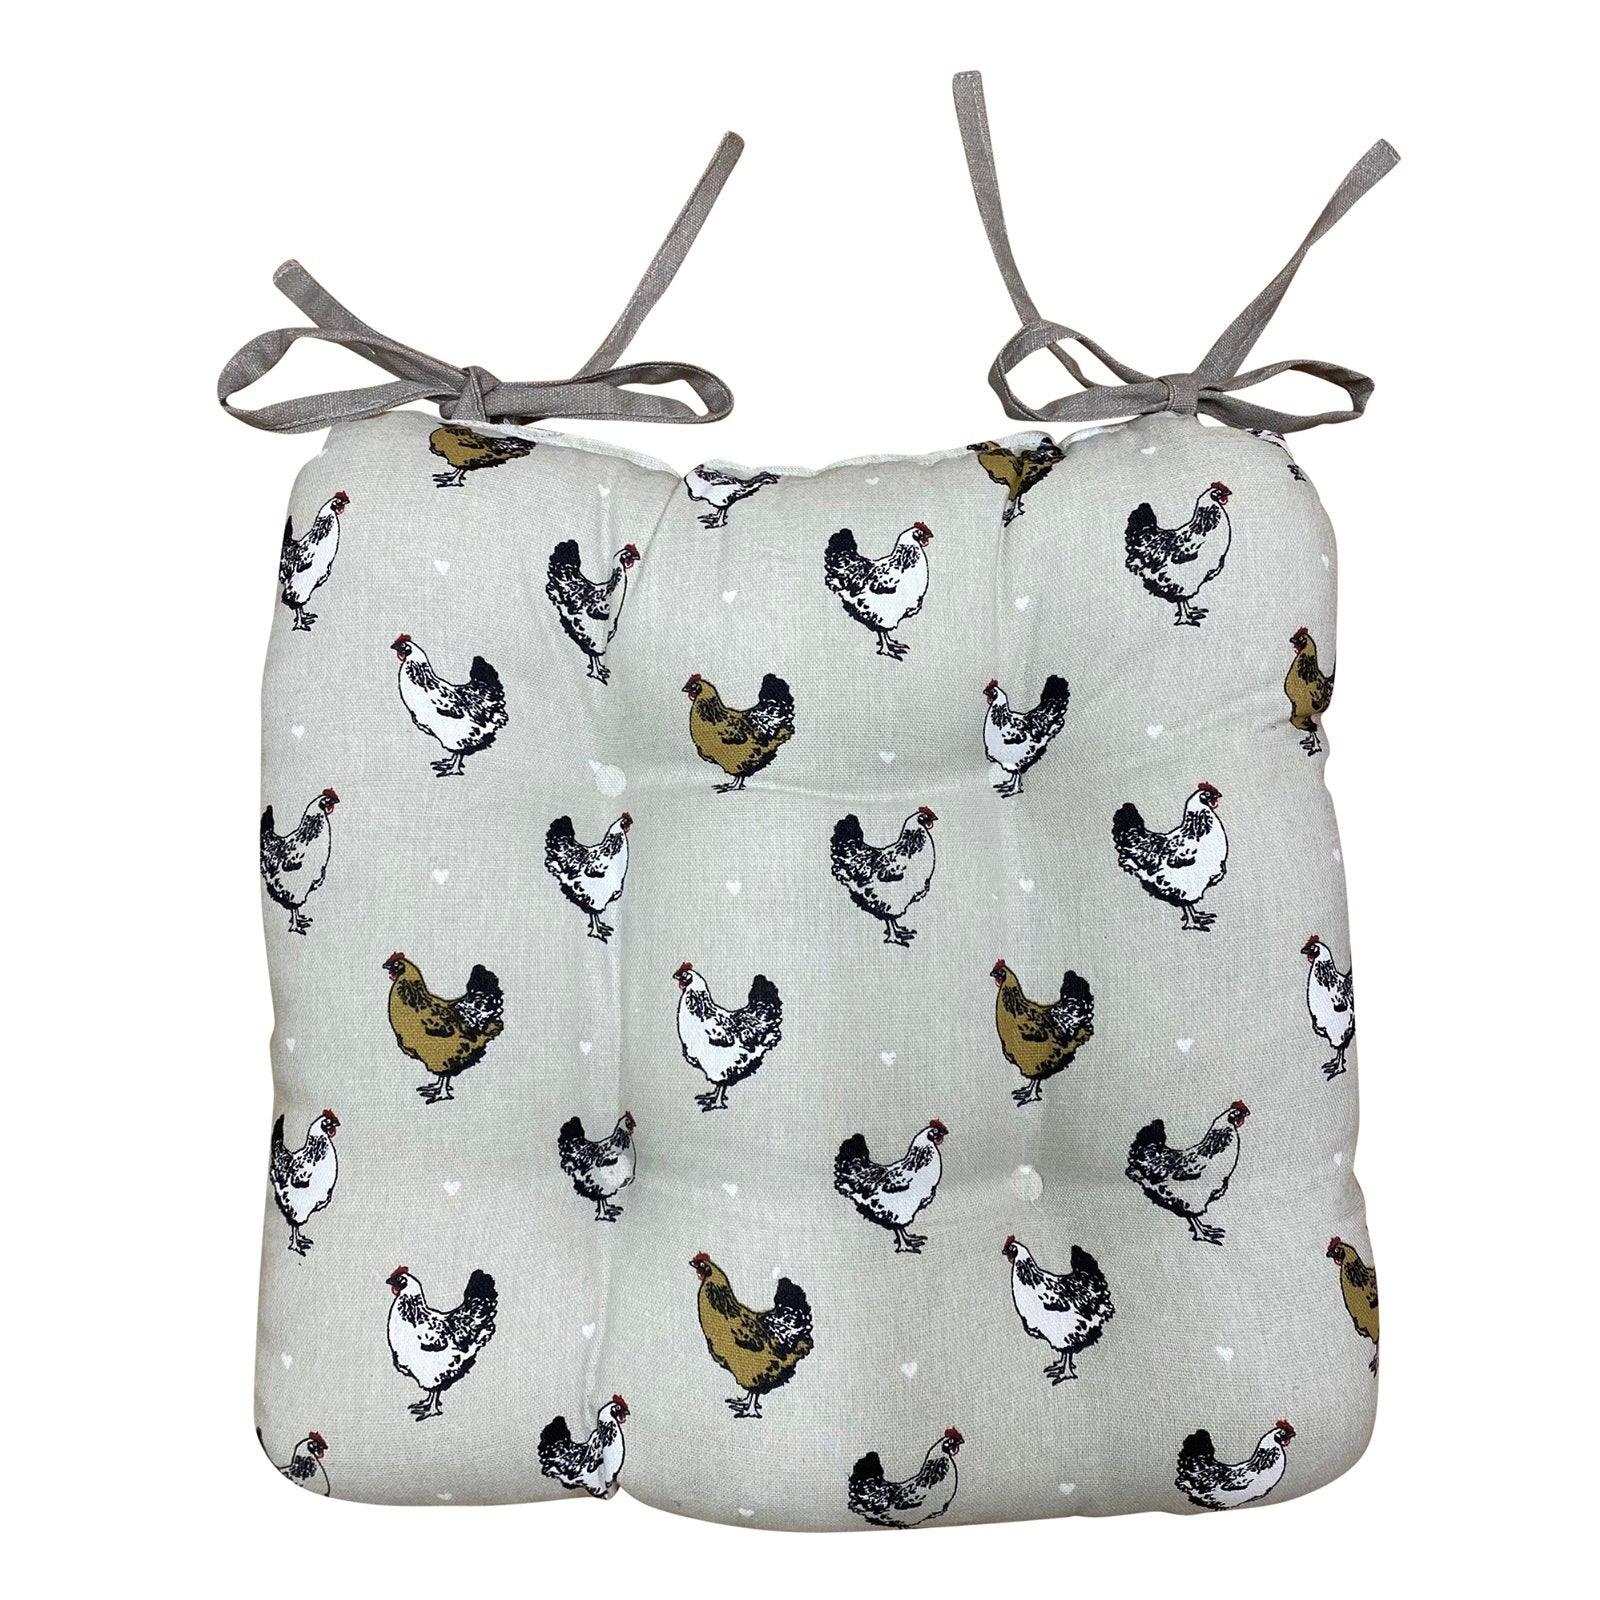 Padded Seat Pad With Ties With A Chicken Print Design-Throw Pillows